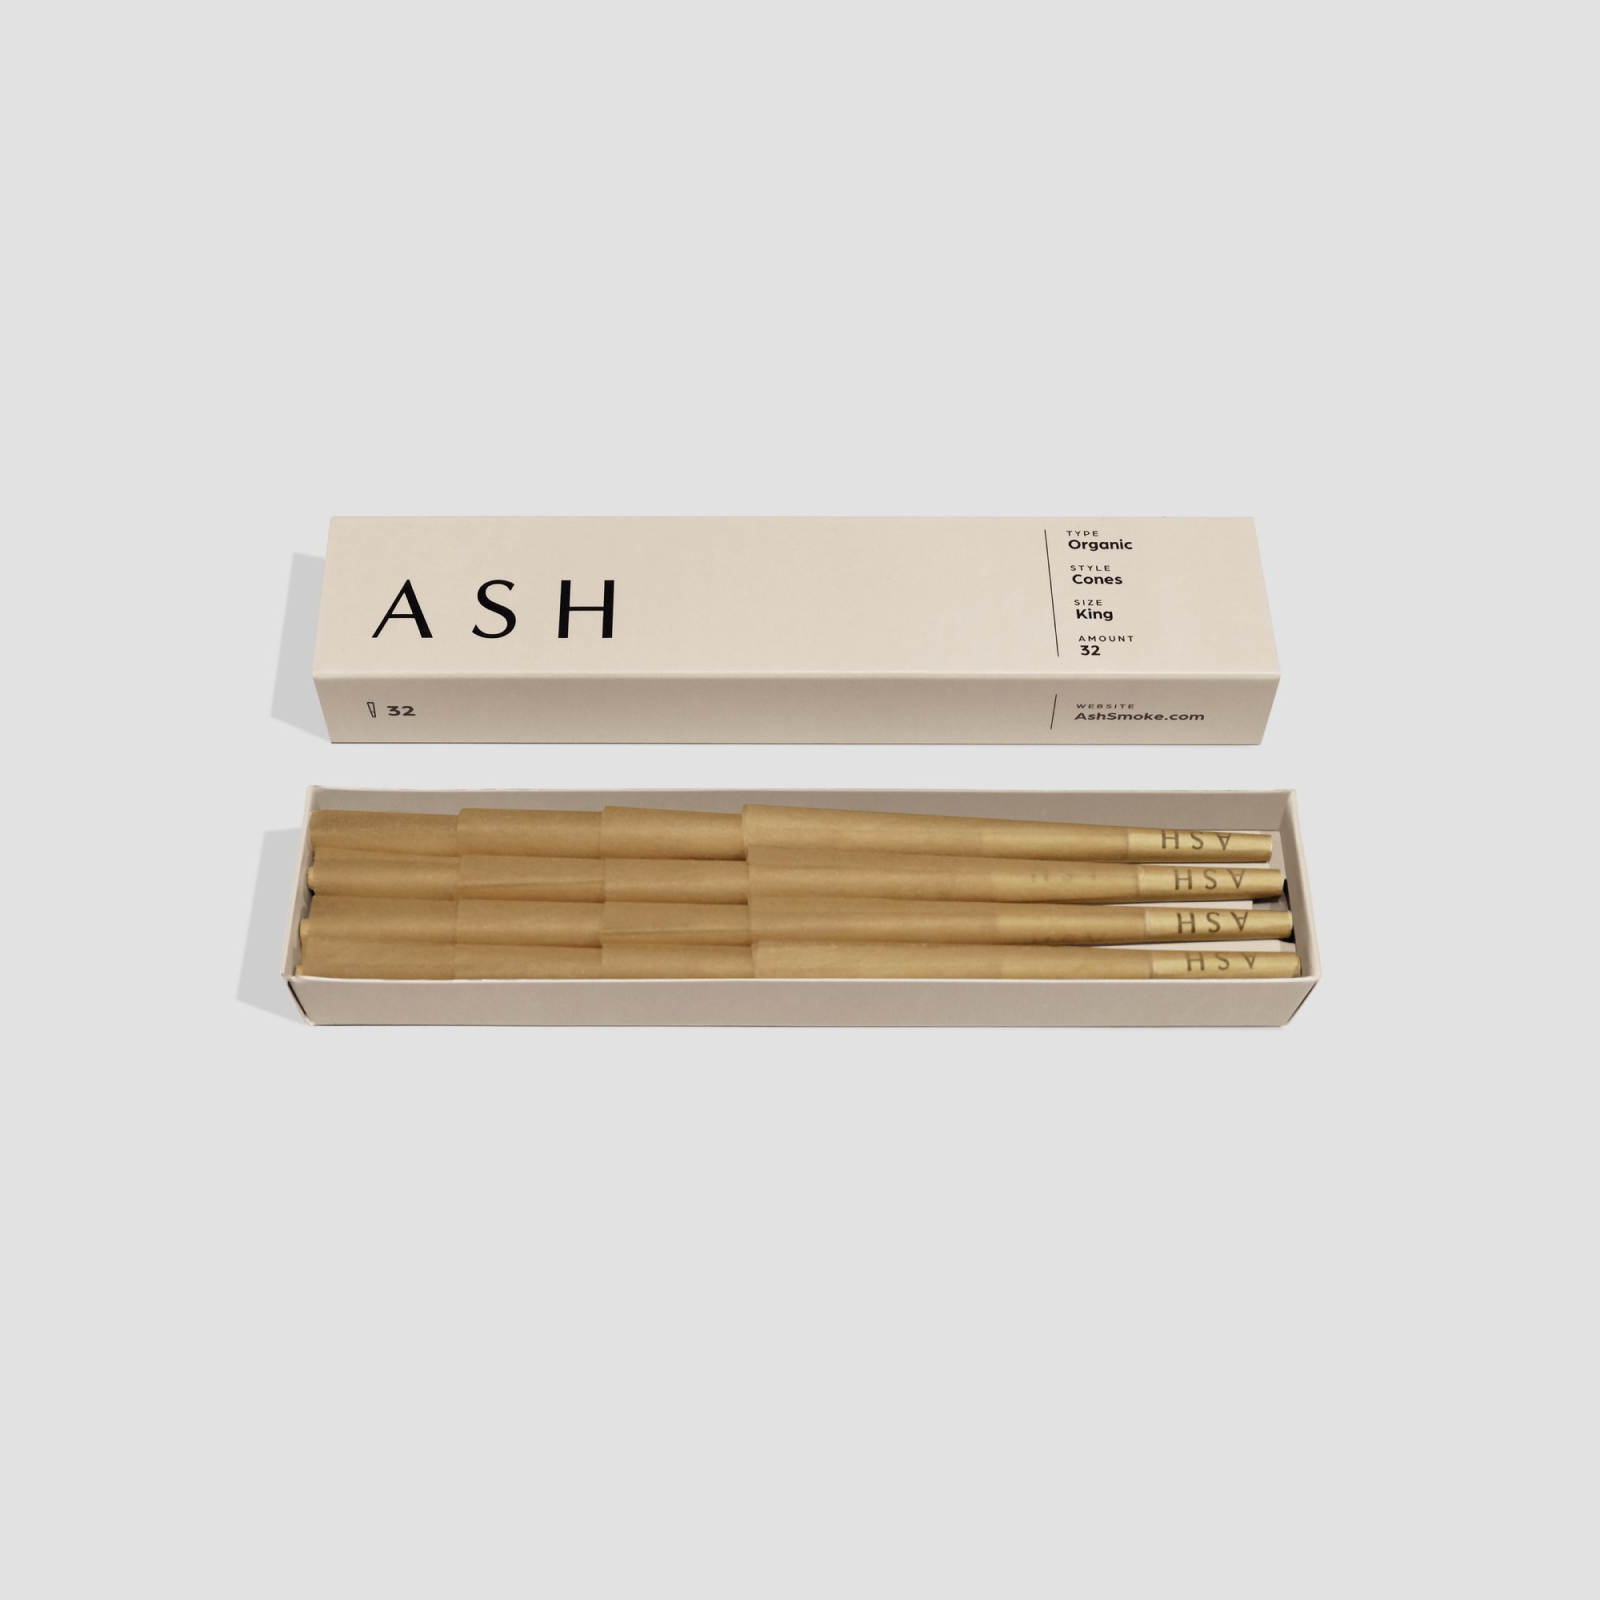 Pre-rolled Cones | Organic | 32 count ASH Rolling Paper 